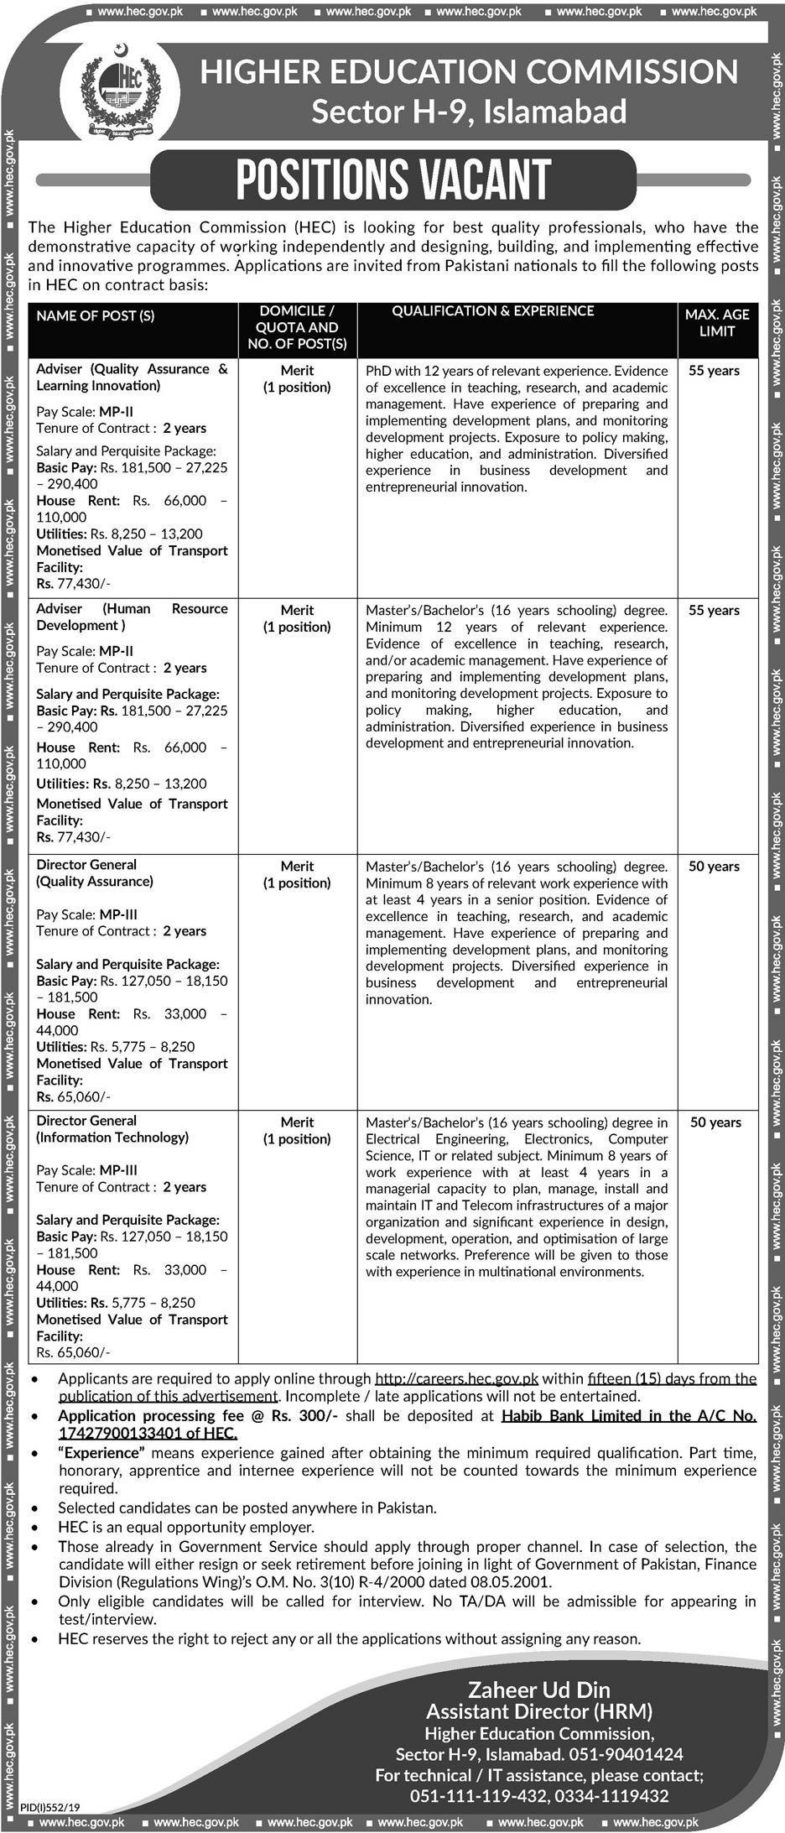 Higher Education Commission (HEC) Jobs 2019 for Various Management / Specialists Posts